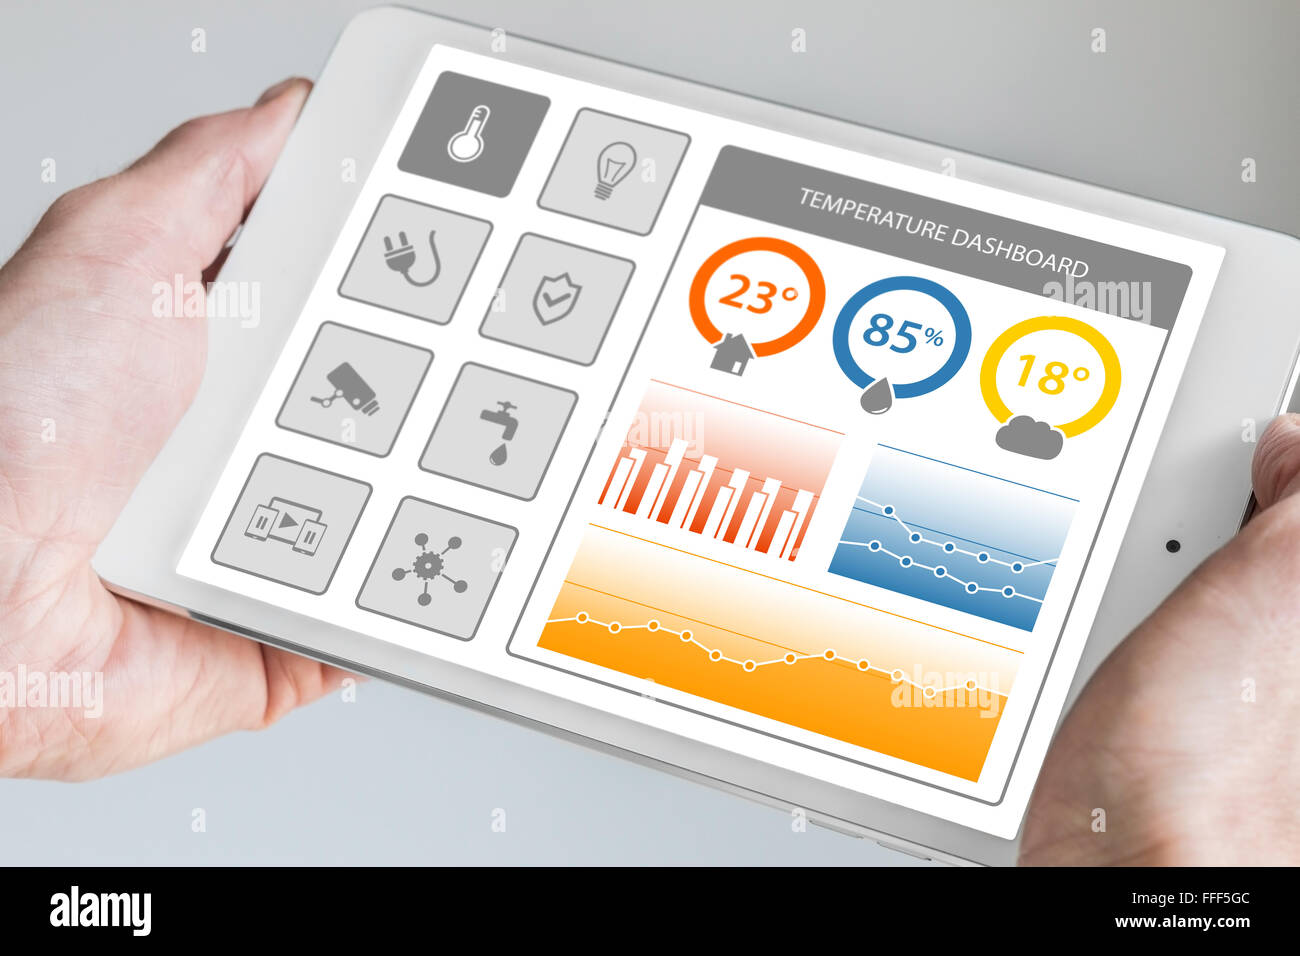 Smart home dashboard in order to control home appliances. Hand holding modern tablet with dashboard displaying charts. Stock Photo